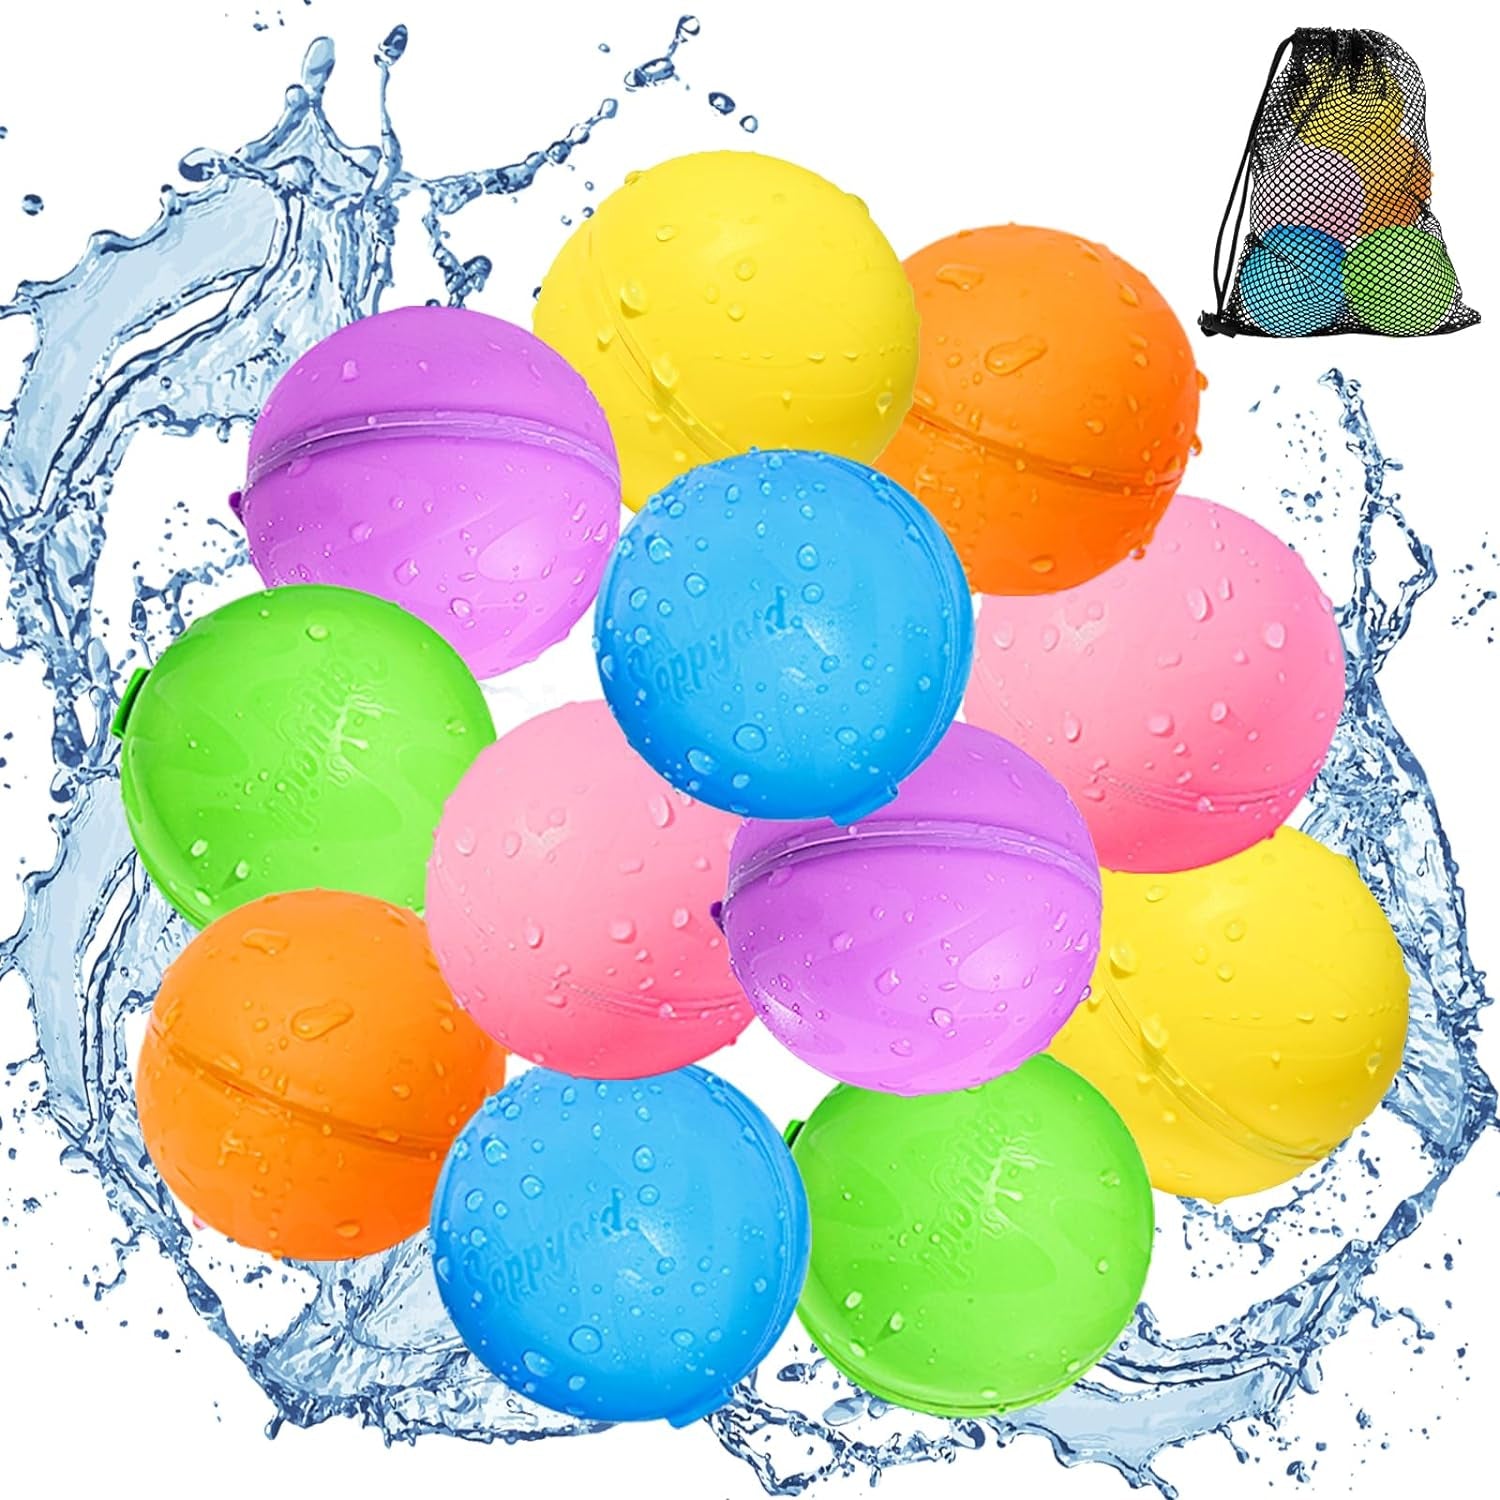 SOPPYCID Reusable Magnetic Water Balloons, 12 Pack Refillable Water Bombs Self Sealing Quick Fill, Latex-Free Silicone Outdoor Toys for Kids Adults Summer Fun Pool Beach Water Toys Birthday Gifts